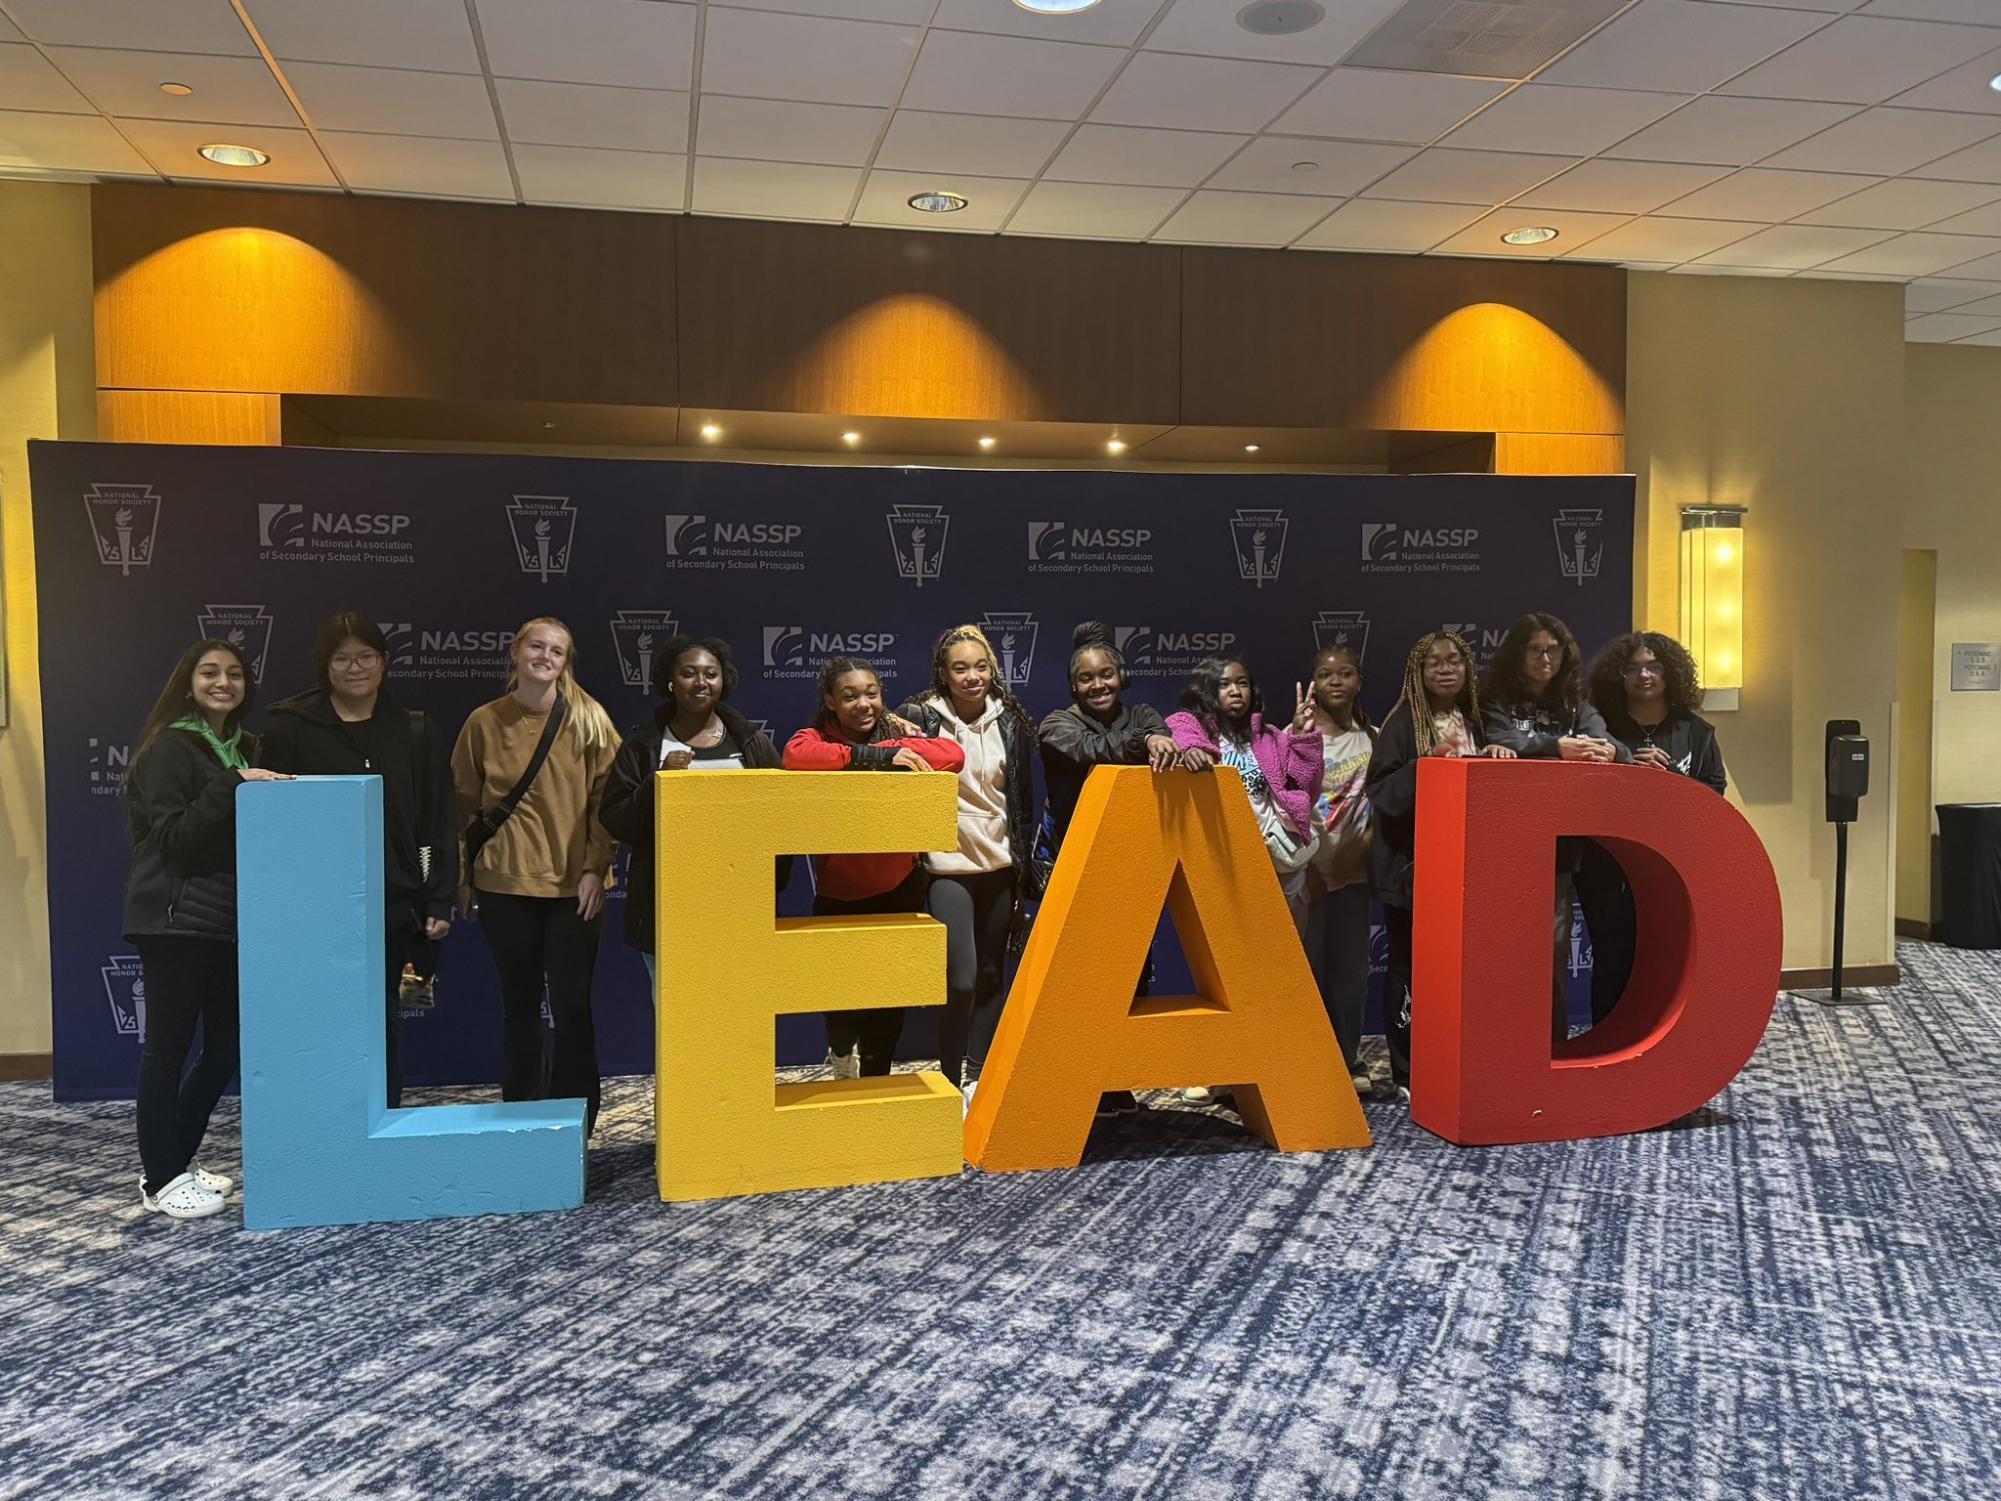 IB and SSA Student Leaders Attend DCs LEAD Conference